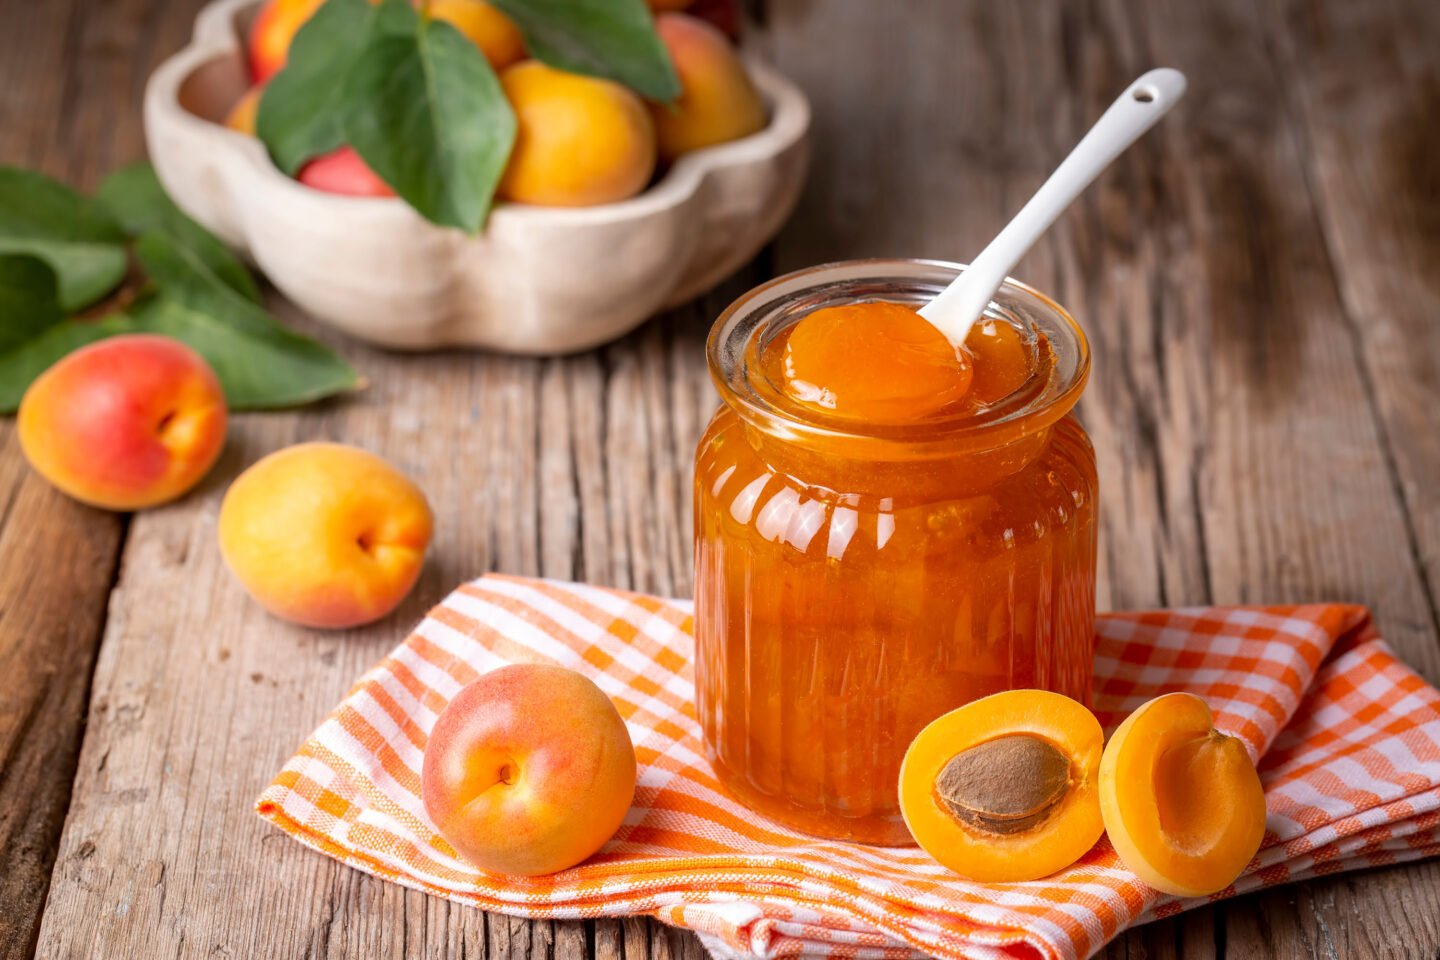 apricot fruits and apricot jam